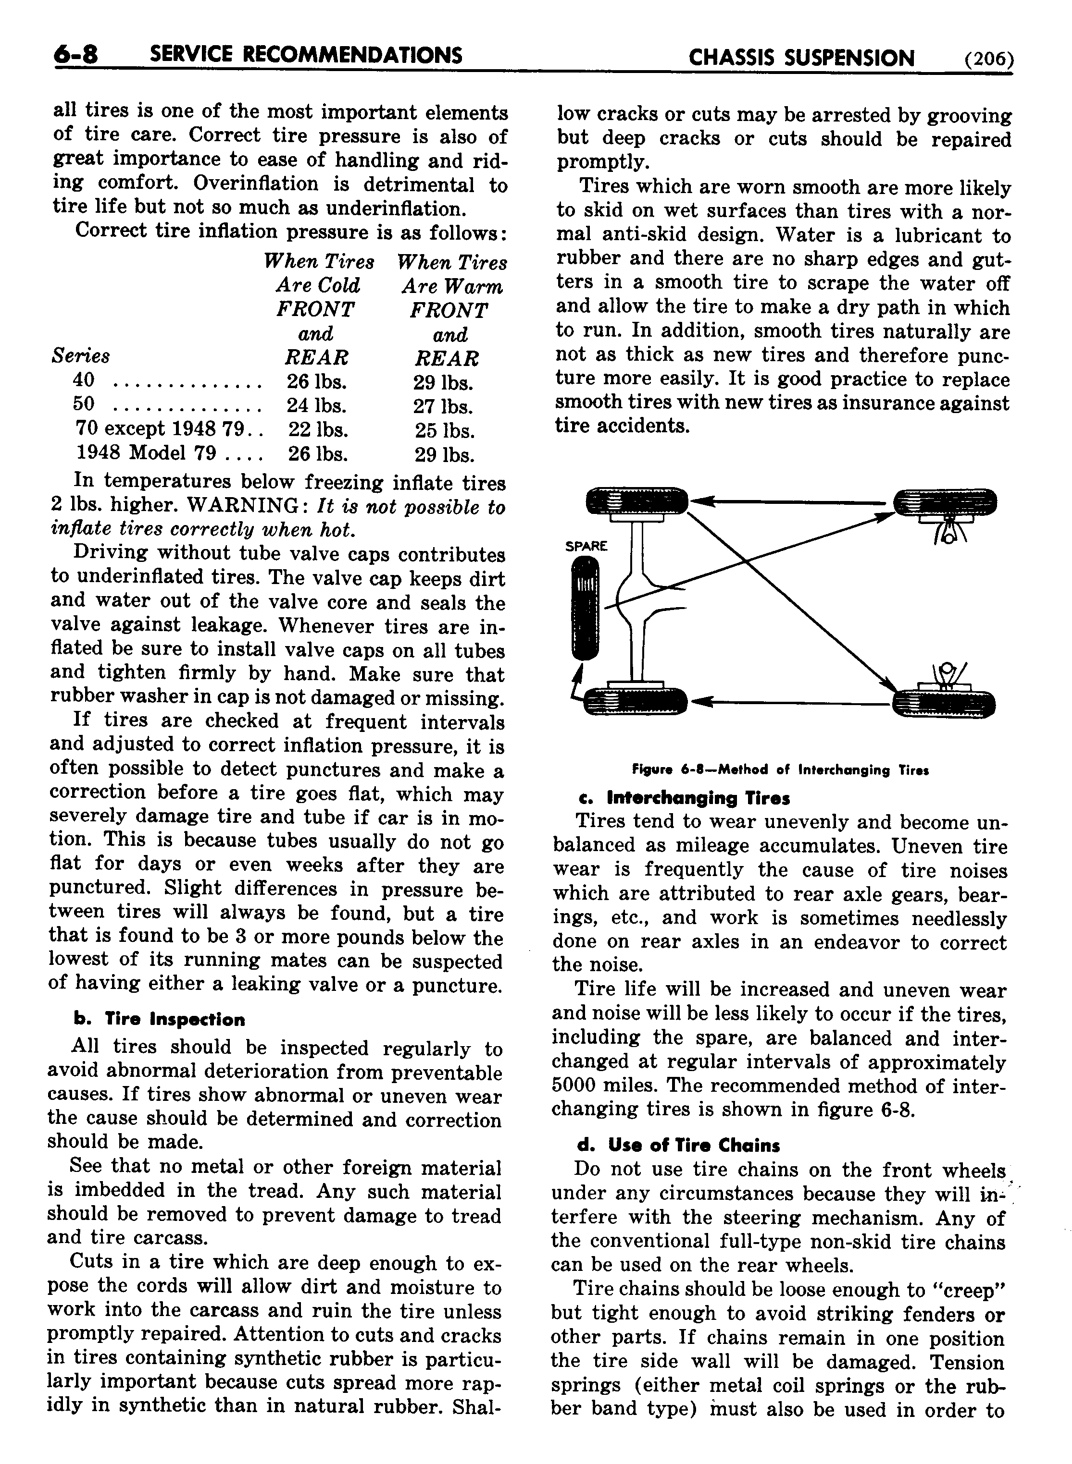 n_07 1948 Buick Shop Manual - Chassis Suspension-008-008.jpg